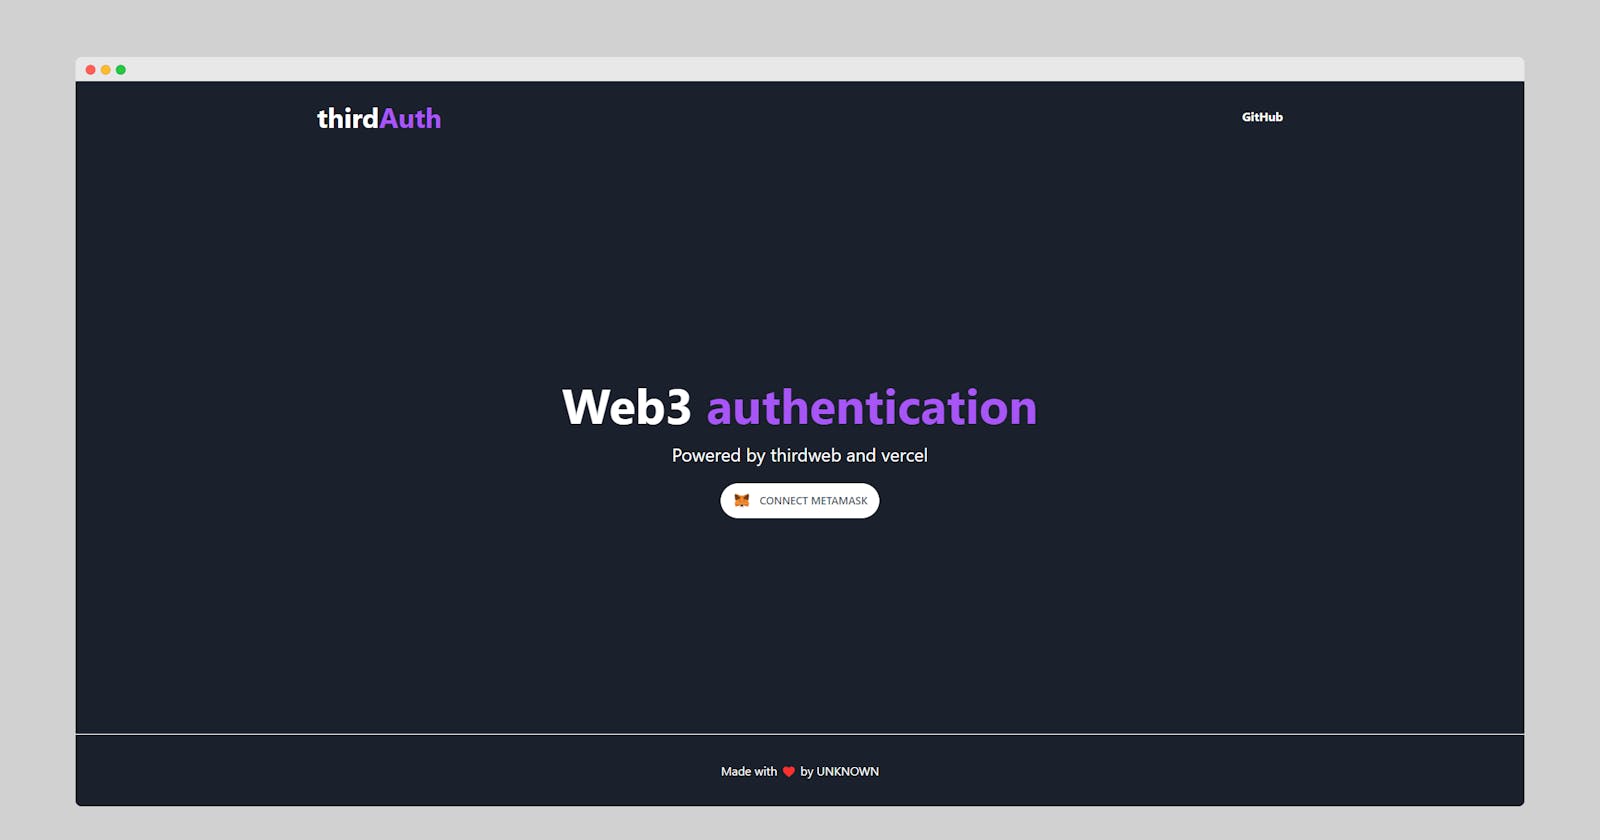 Meet ThirdAuth! A ThirdWeb-powered service to add NFT-Gated authentication to any app or service